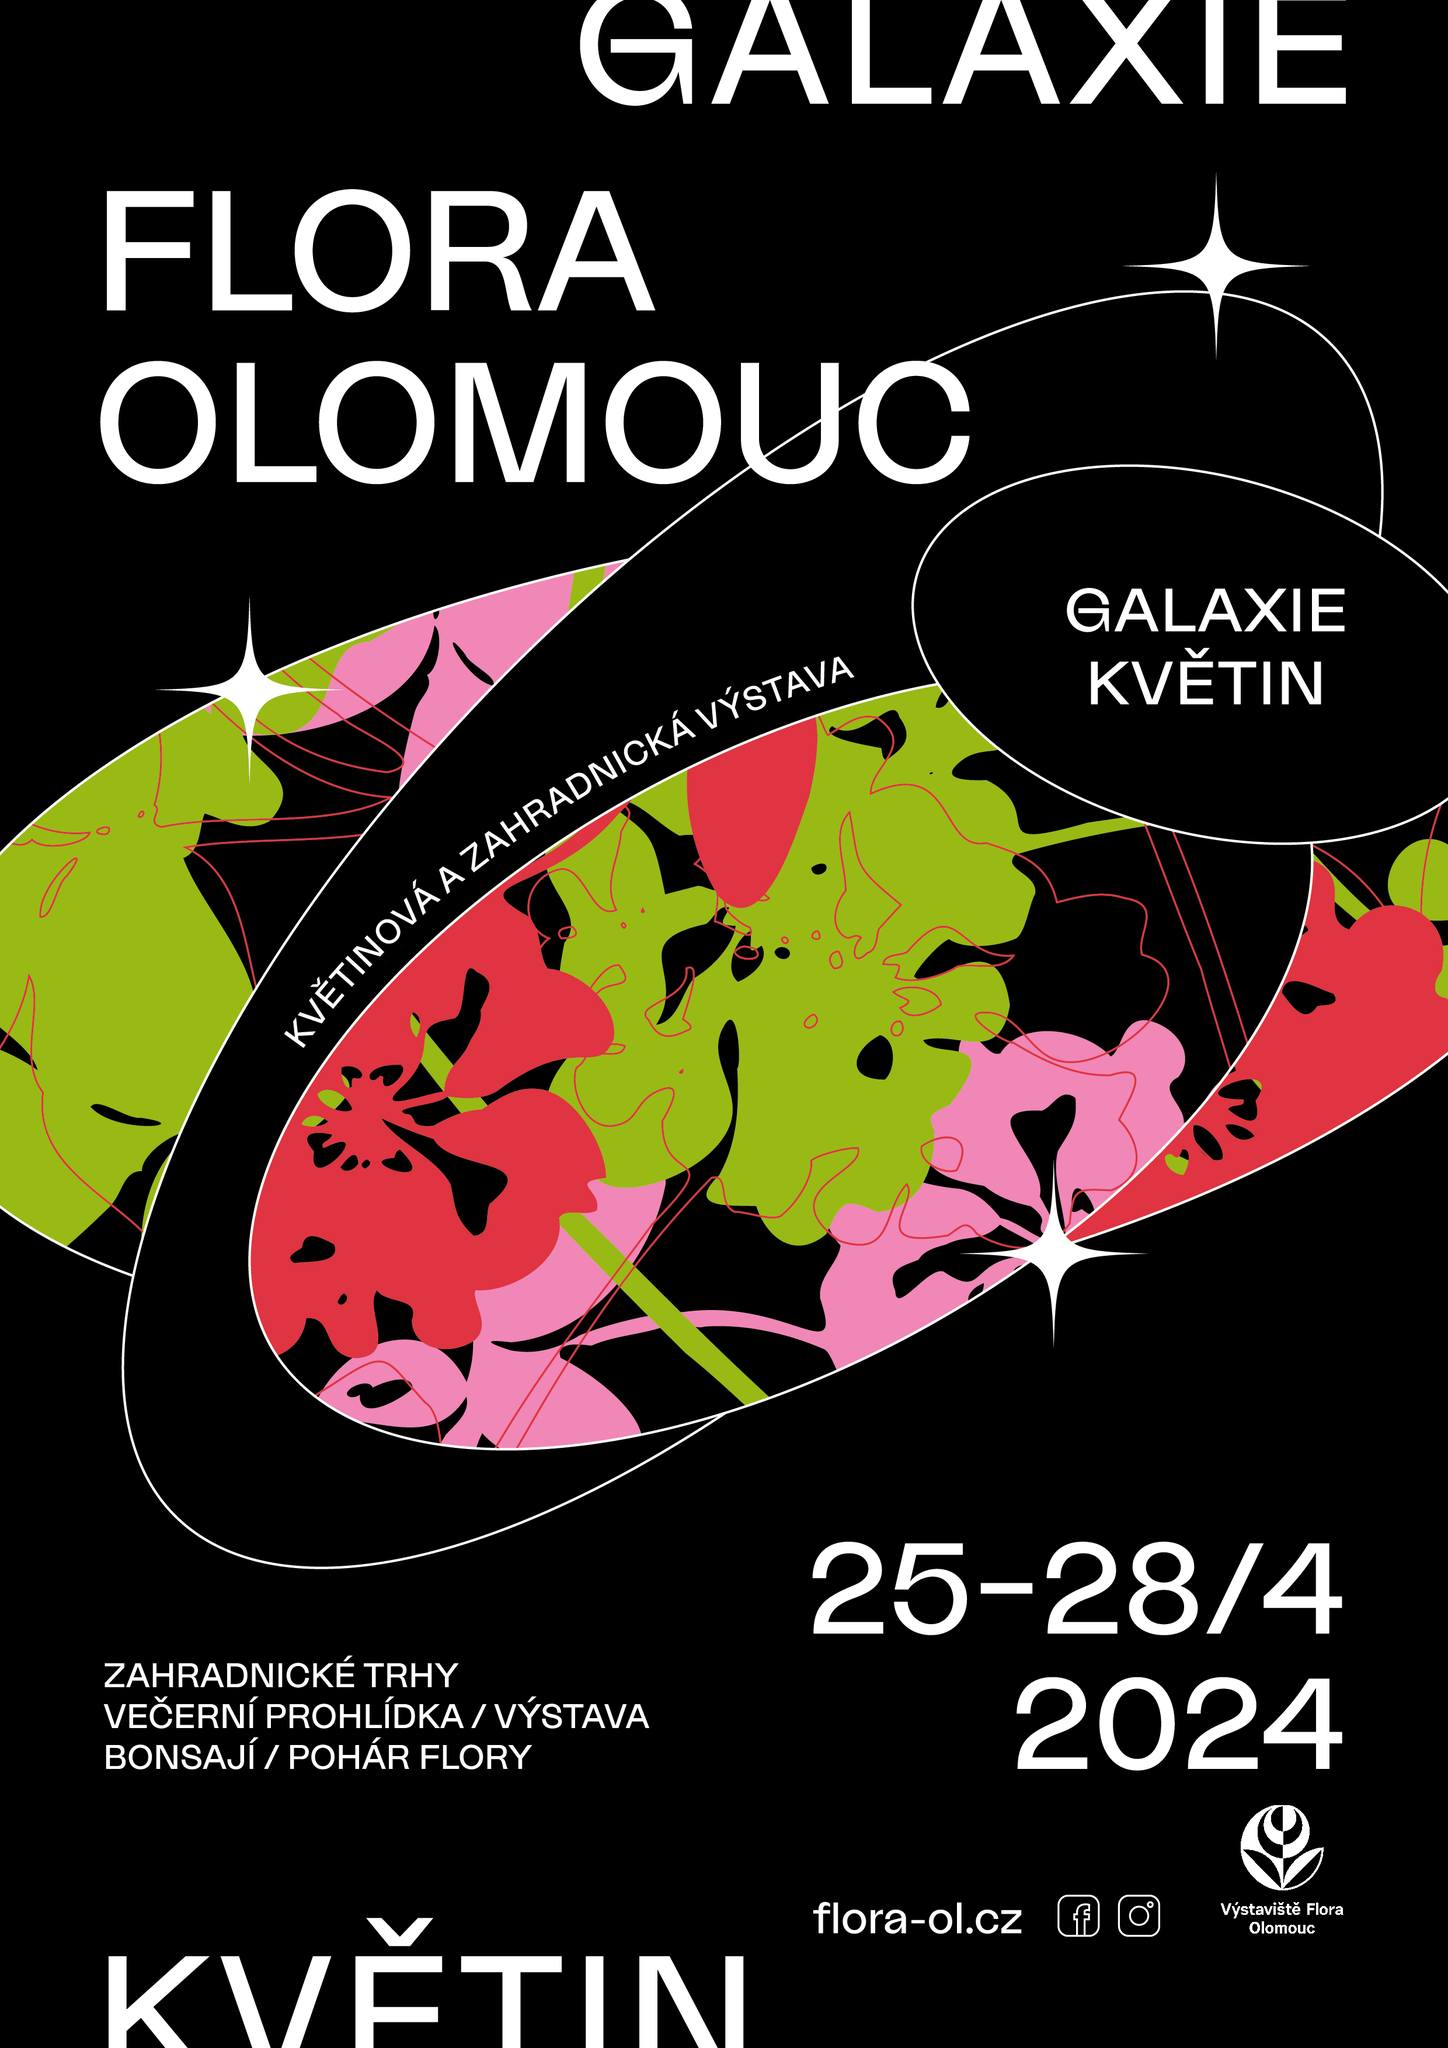 The biggest festival of flowers or the international flower and horticultural exhibition Flora Olomouc